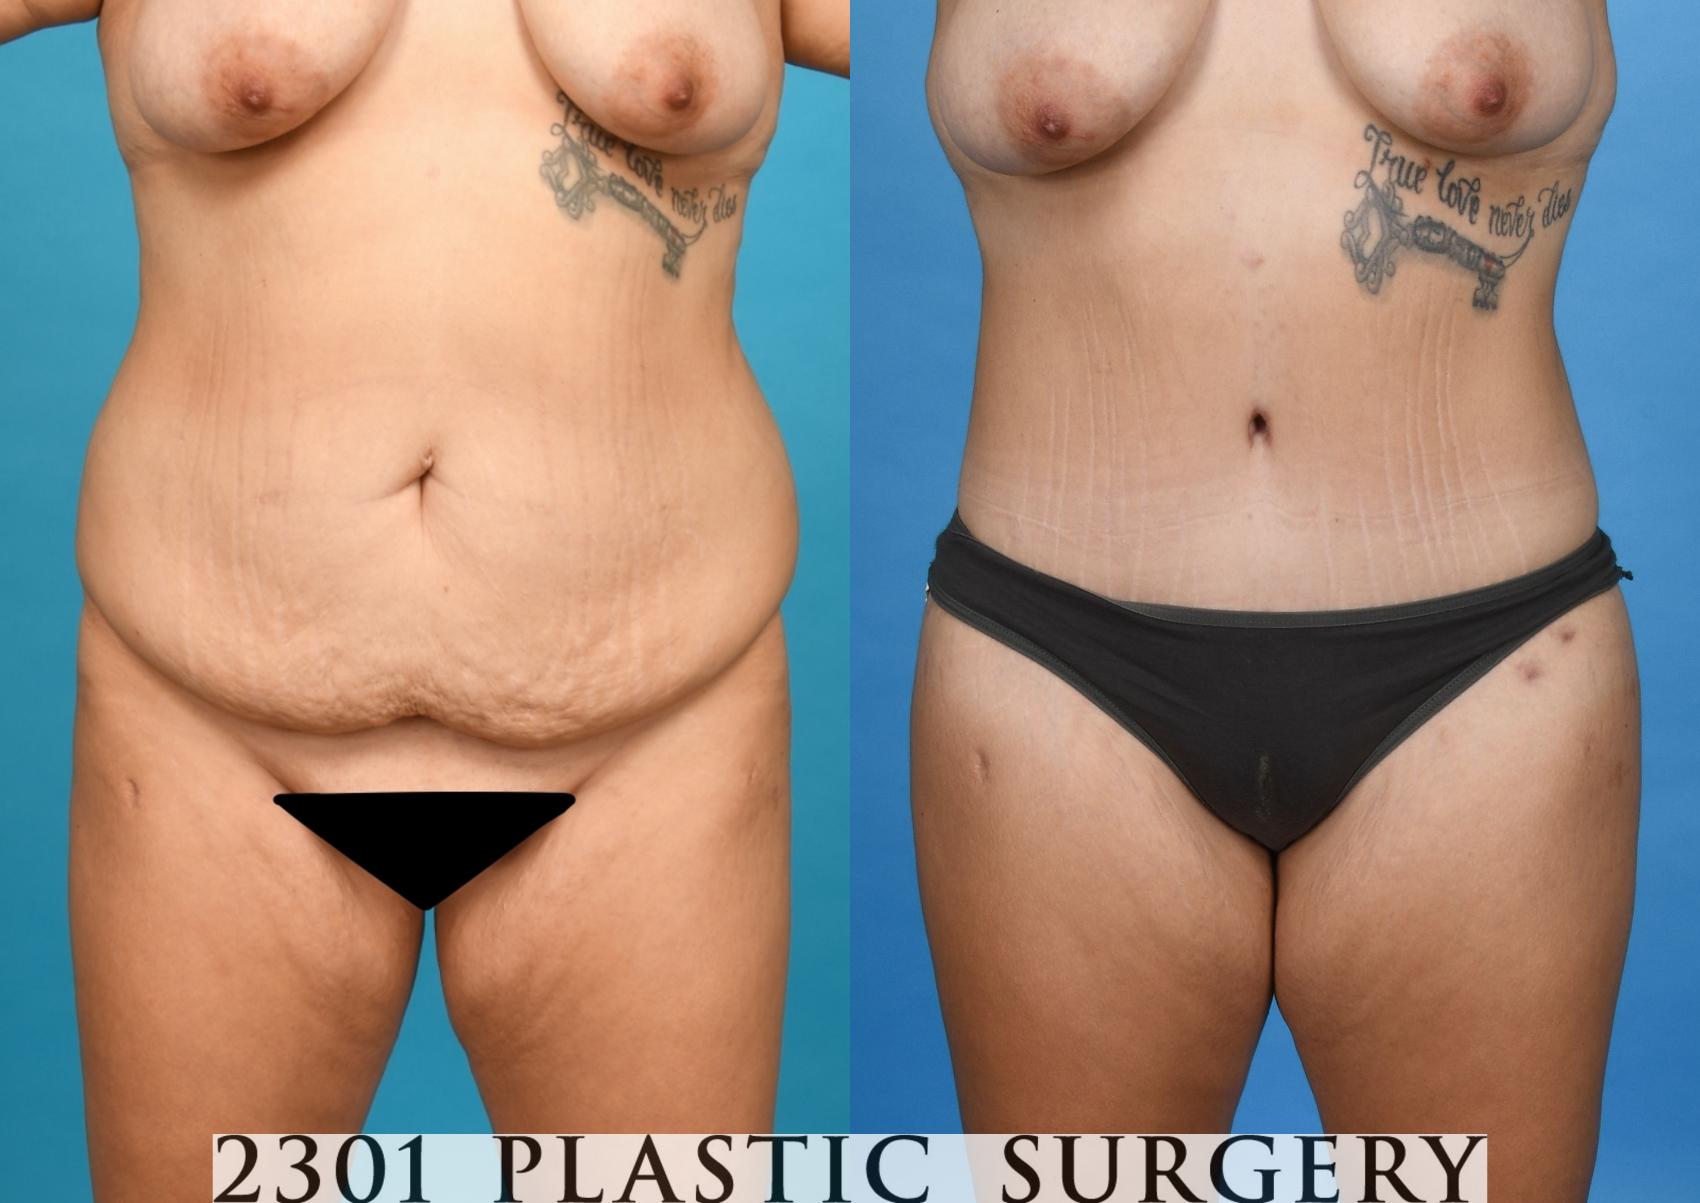 7 Mistakes to Avoid While Recovering From Tummy Tuck Surgery - Allen, TX -  North Dallas Plastic Surgery